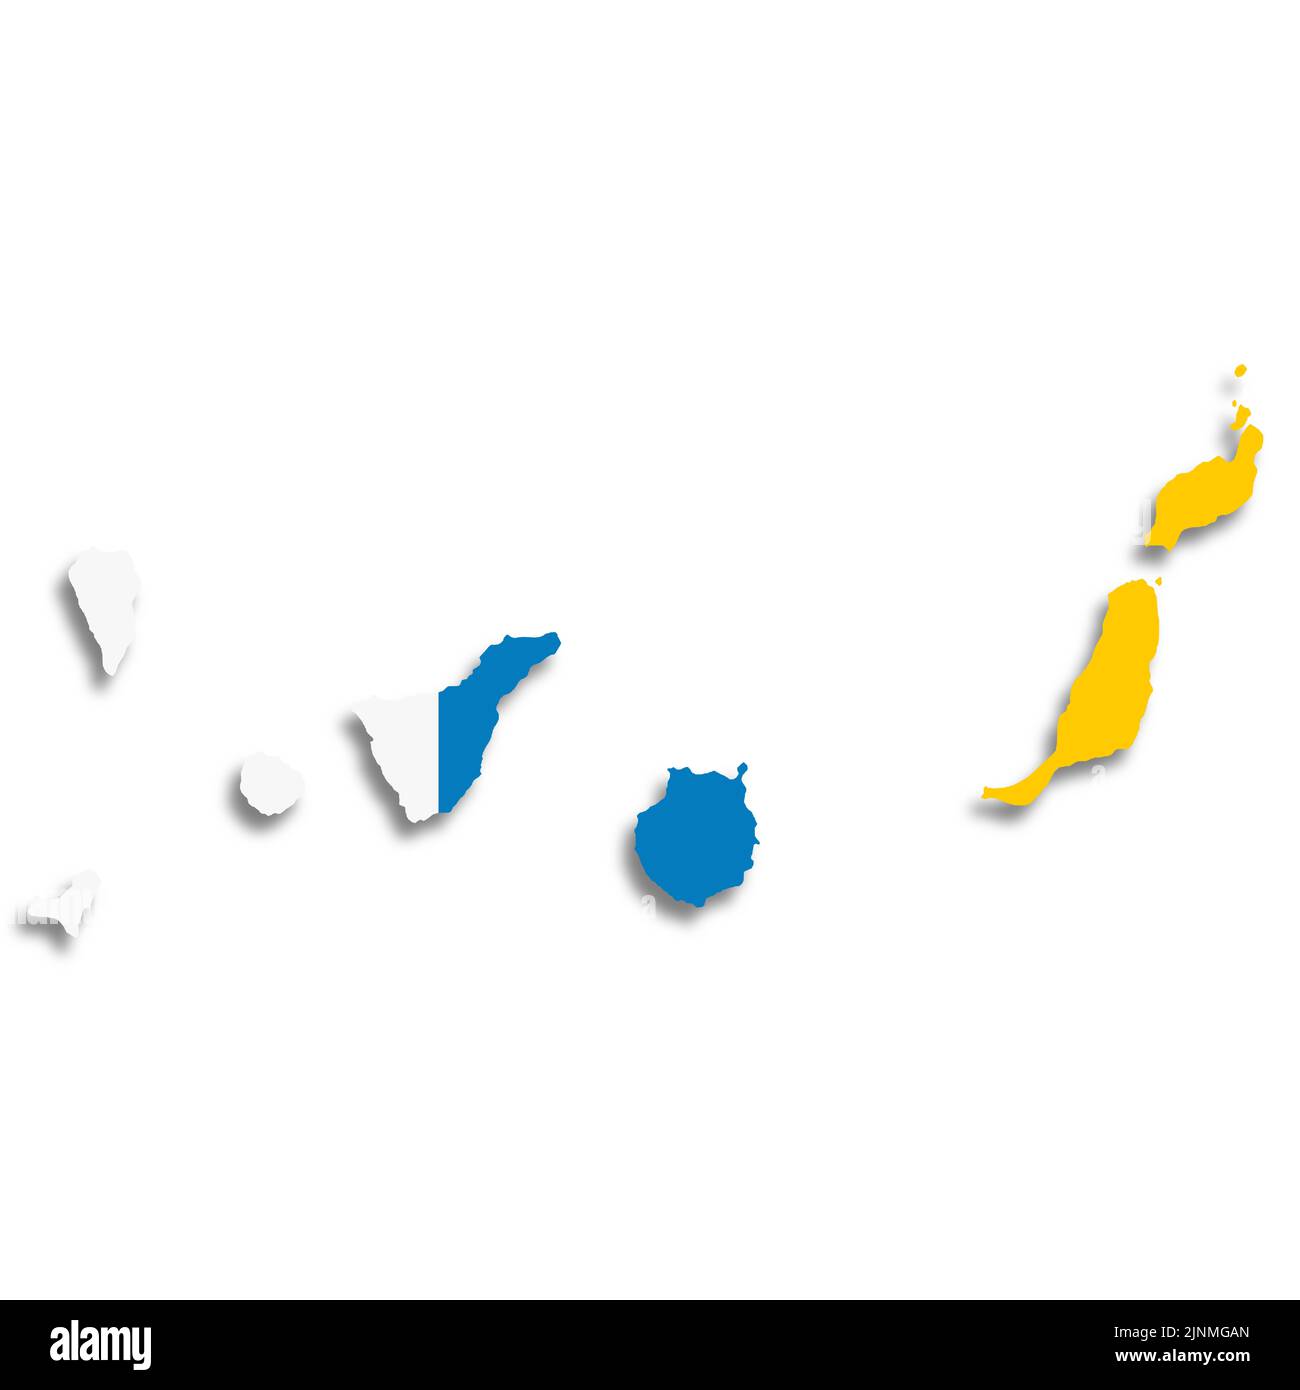 Canary Islands flag map on white background 3d illustration with clipping path Stock Photo